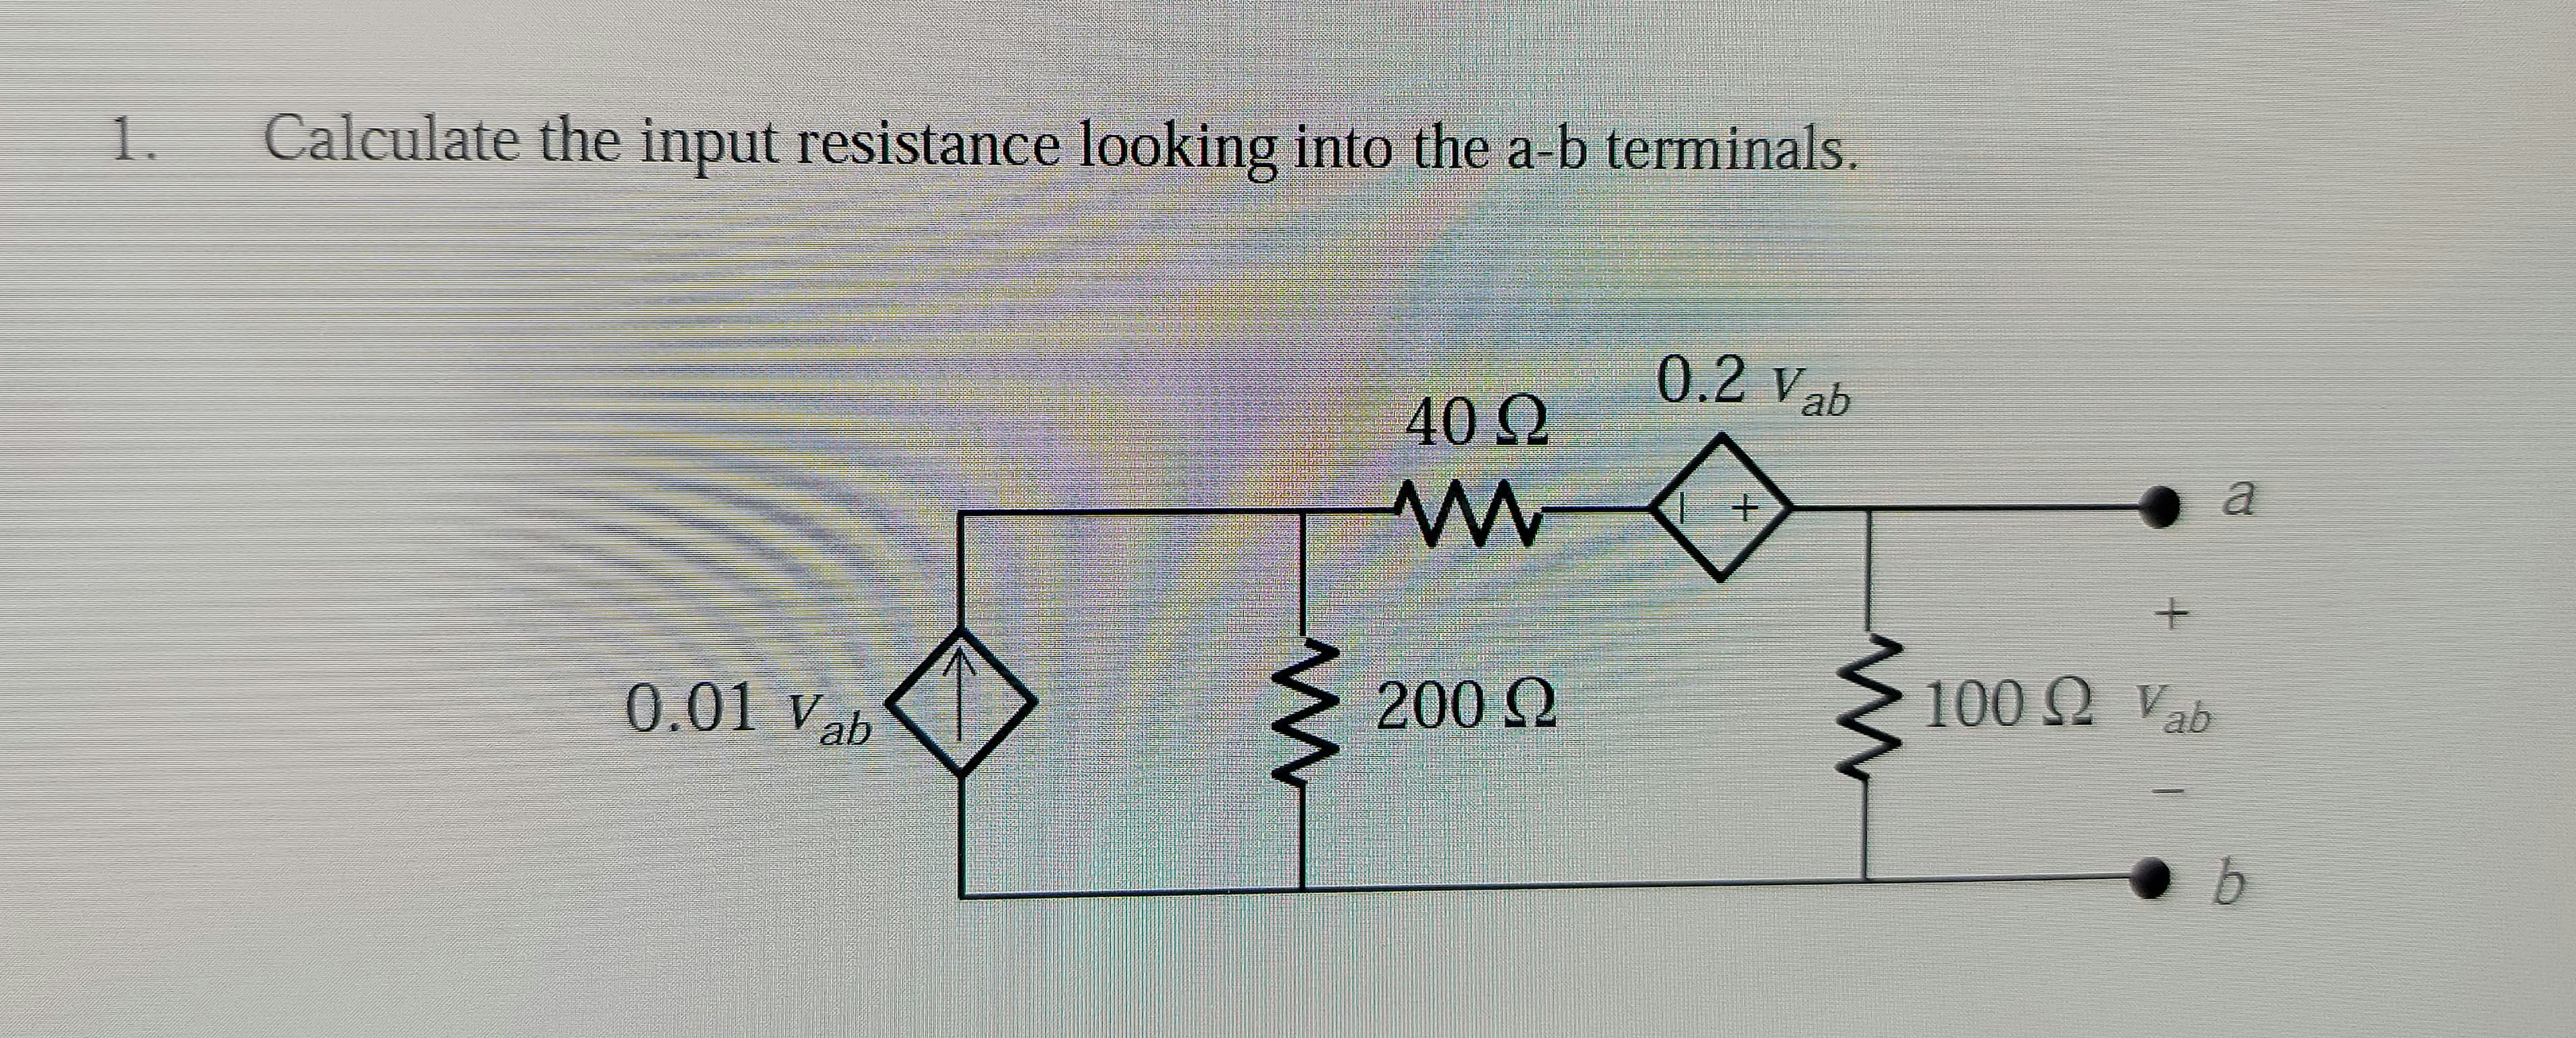 1.
Calculate the input resistance looking into the a-b terminals.
0.2 Vab
40 Ω
a
200 Ω
100Q Vab
0.01 Vab
